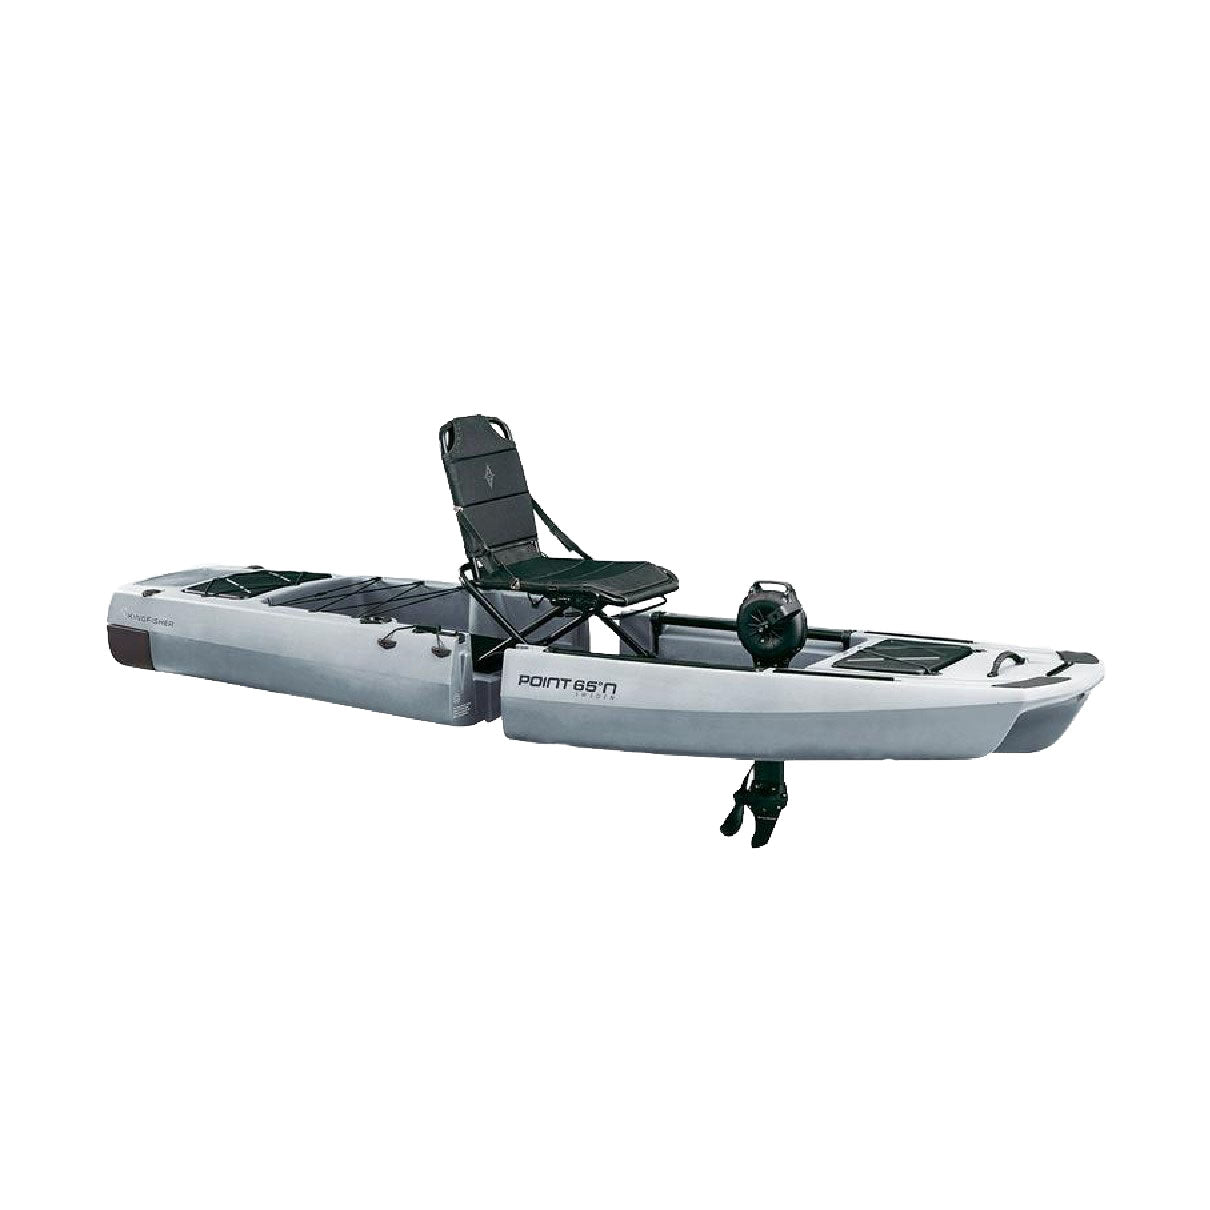 Cheap Pedal Boat With 4 Seat | Paddle boat for sale, Paddle boat, Boat